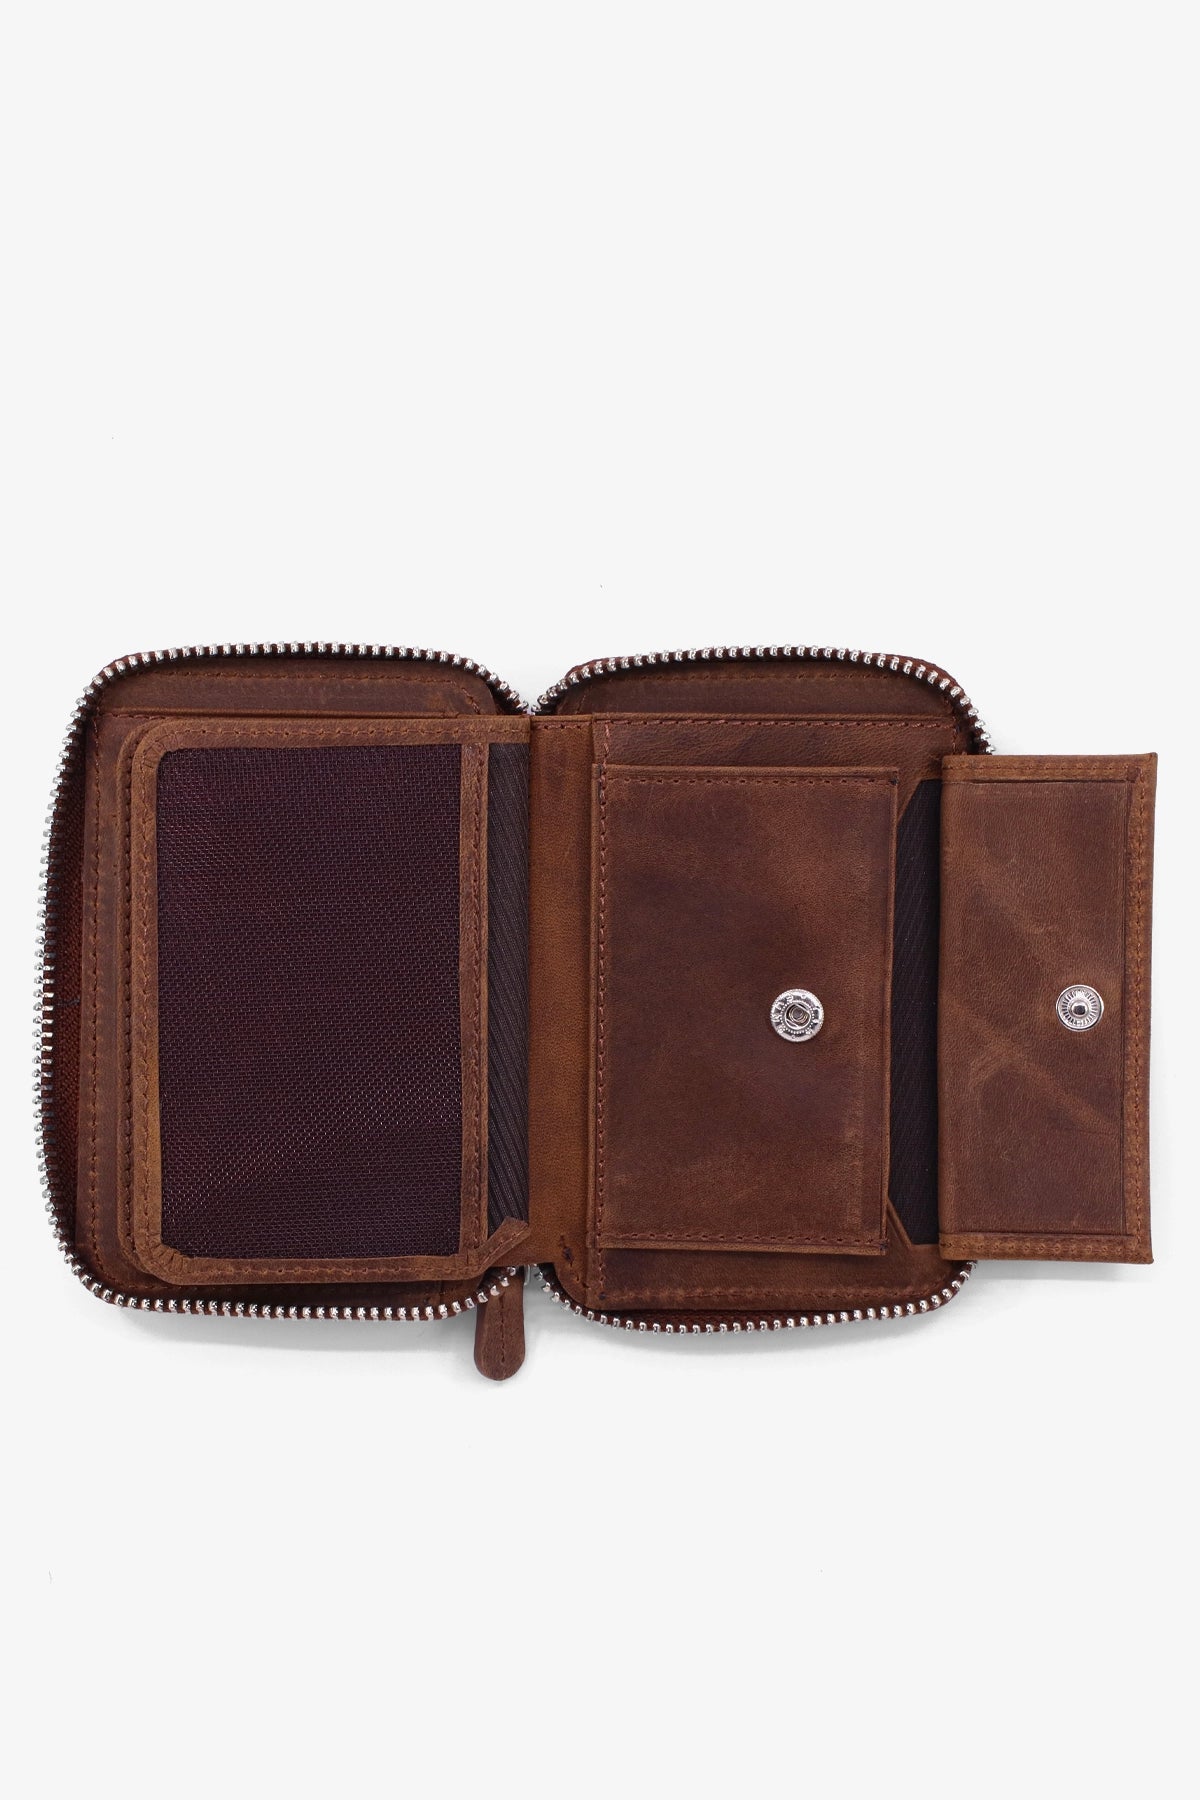 Leather Zip Wallet with Coin Compartment - Vintage Tan